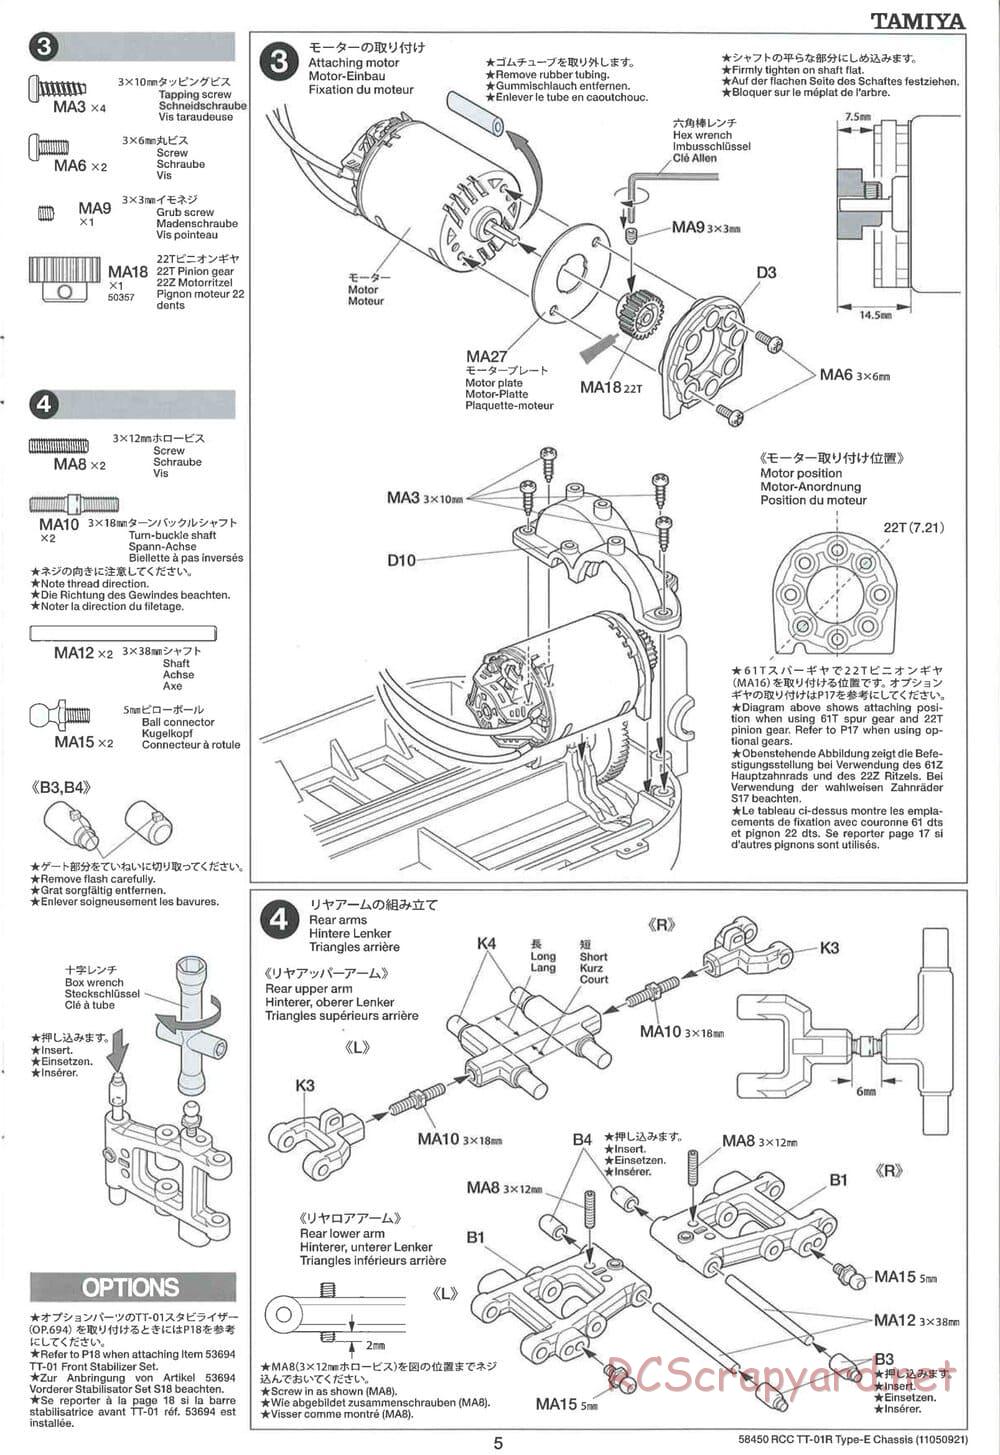 Tamiya - TT-01R Type-E Chassis - Manual - Page 5